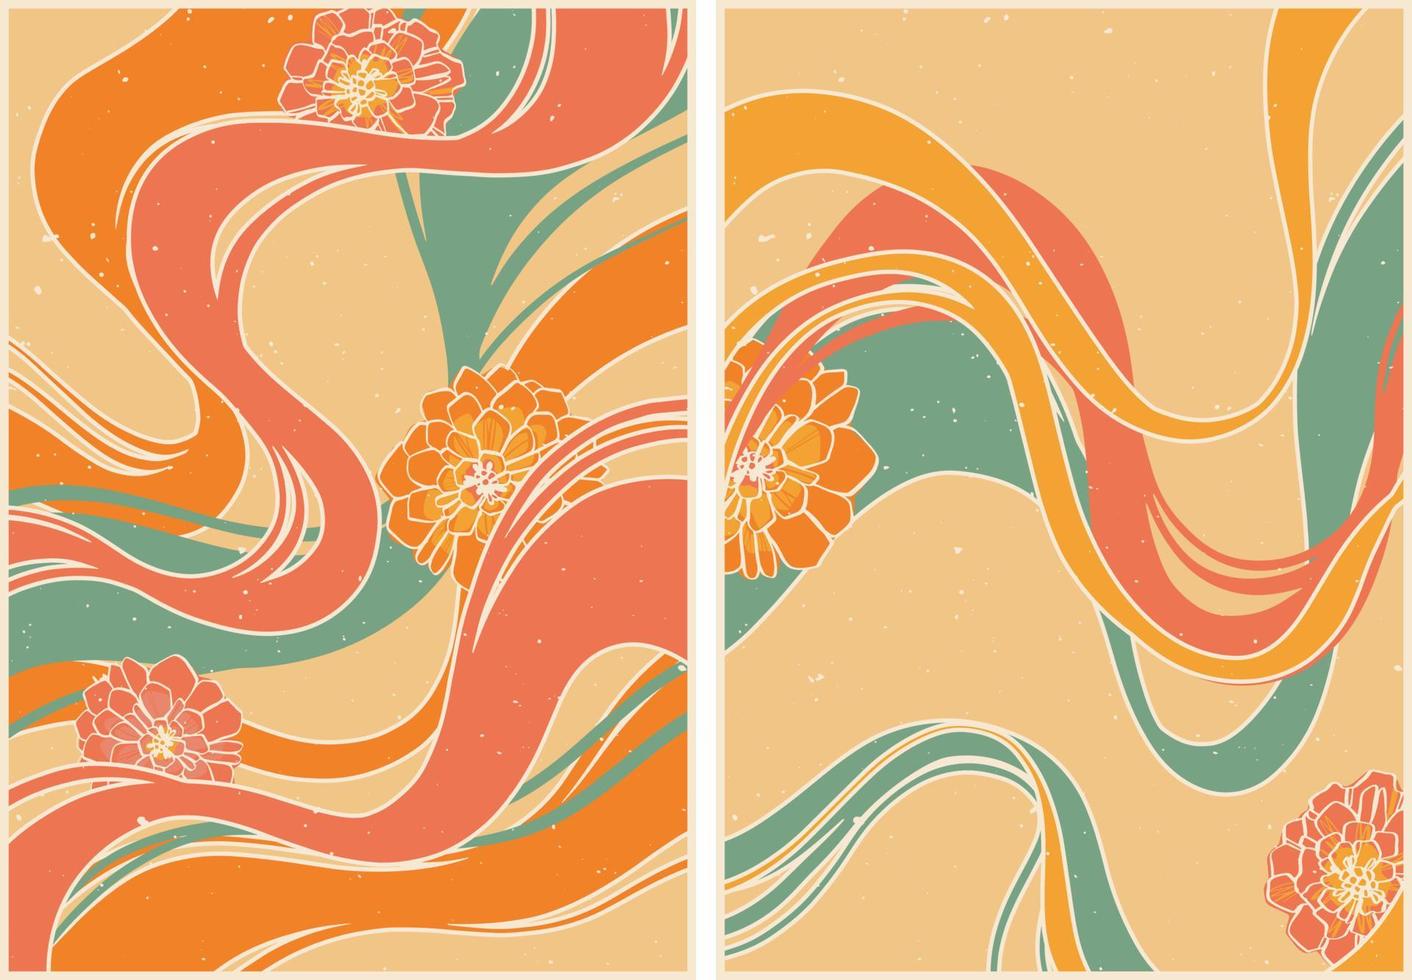 Set of abstract posters in retro style with colorful waves and flowers. Vintage retro style. Psychedelic wallpaper. Colorful vector art design. 60s, 70s, hippies. Set of postcard, poster design.